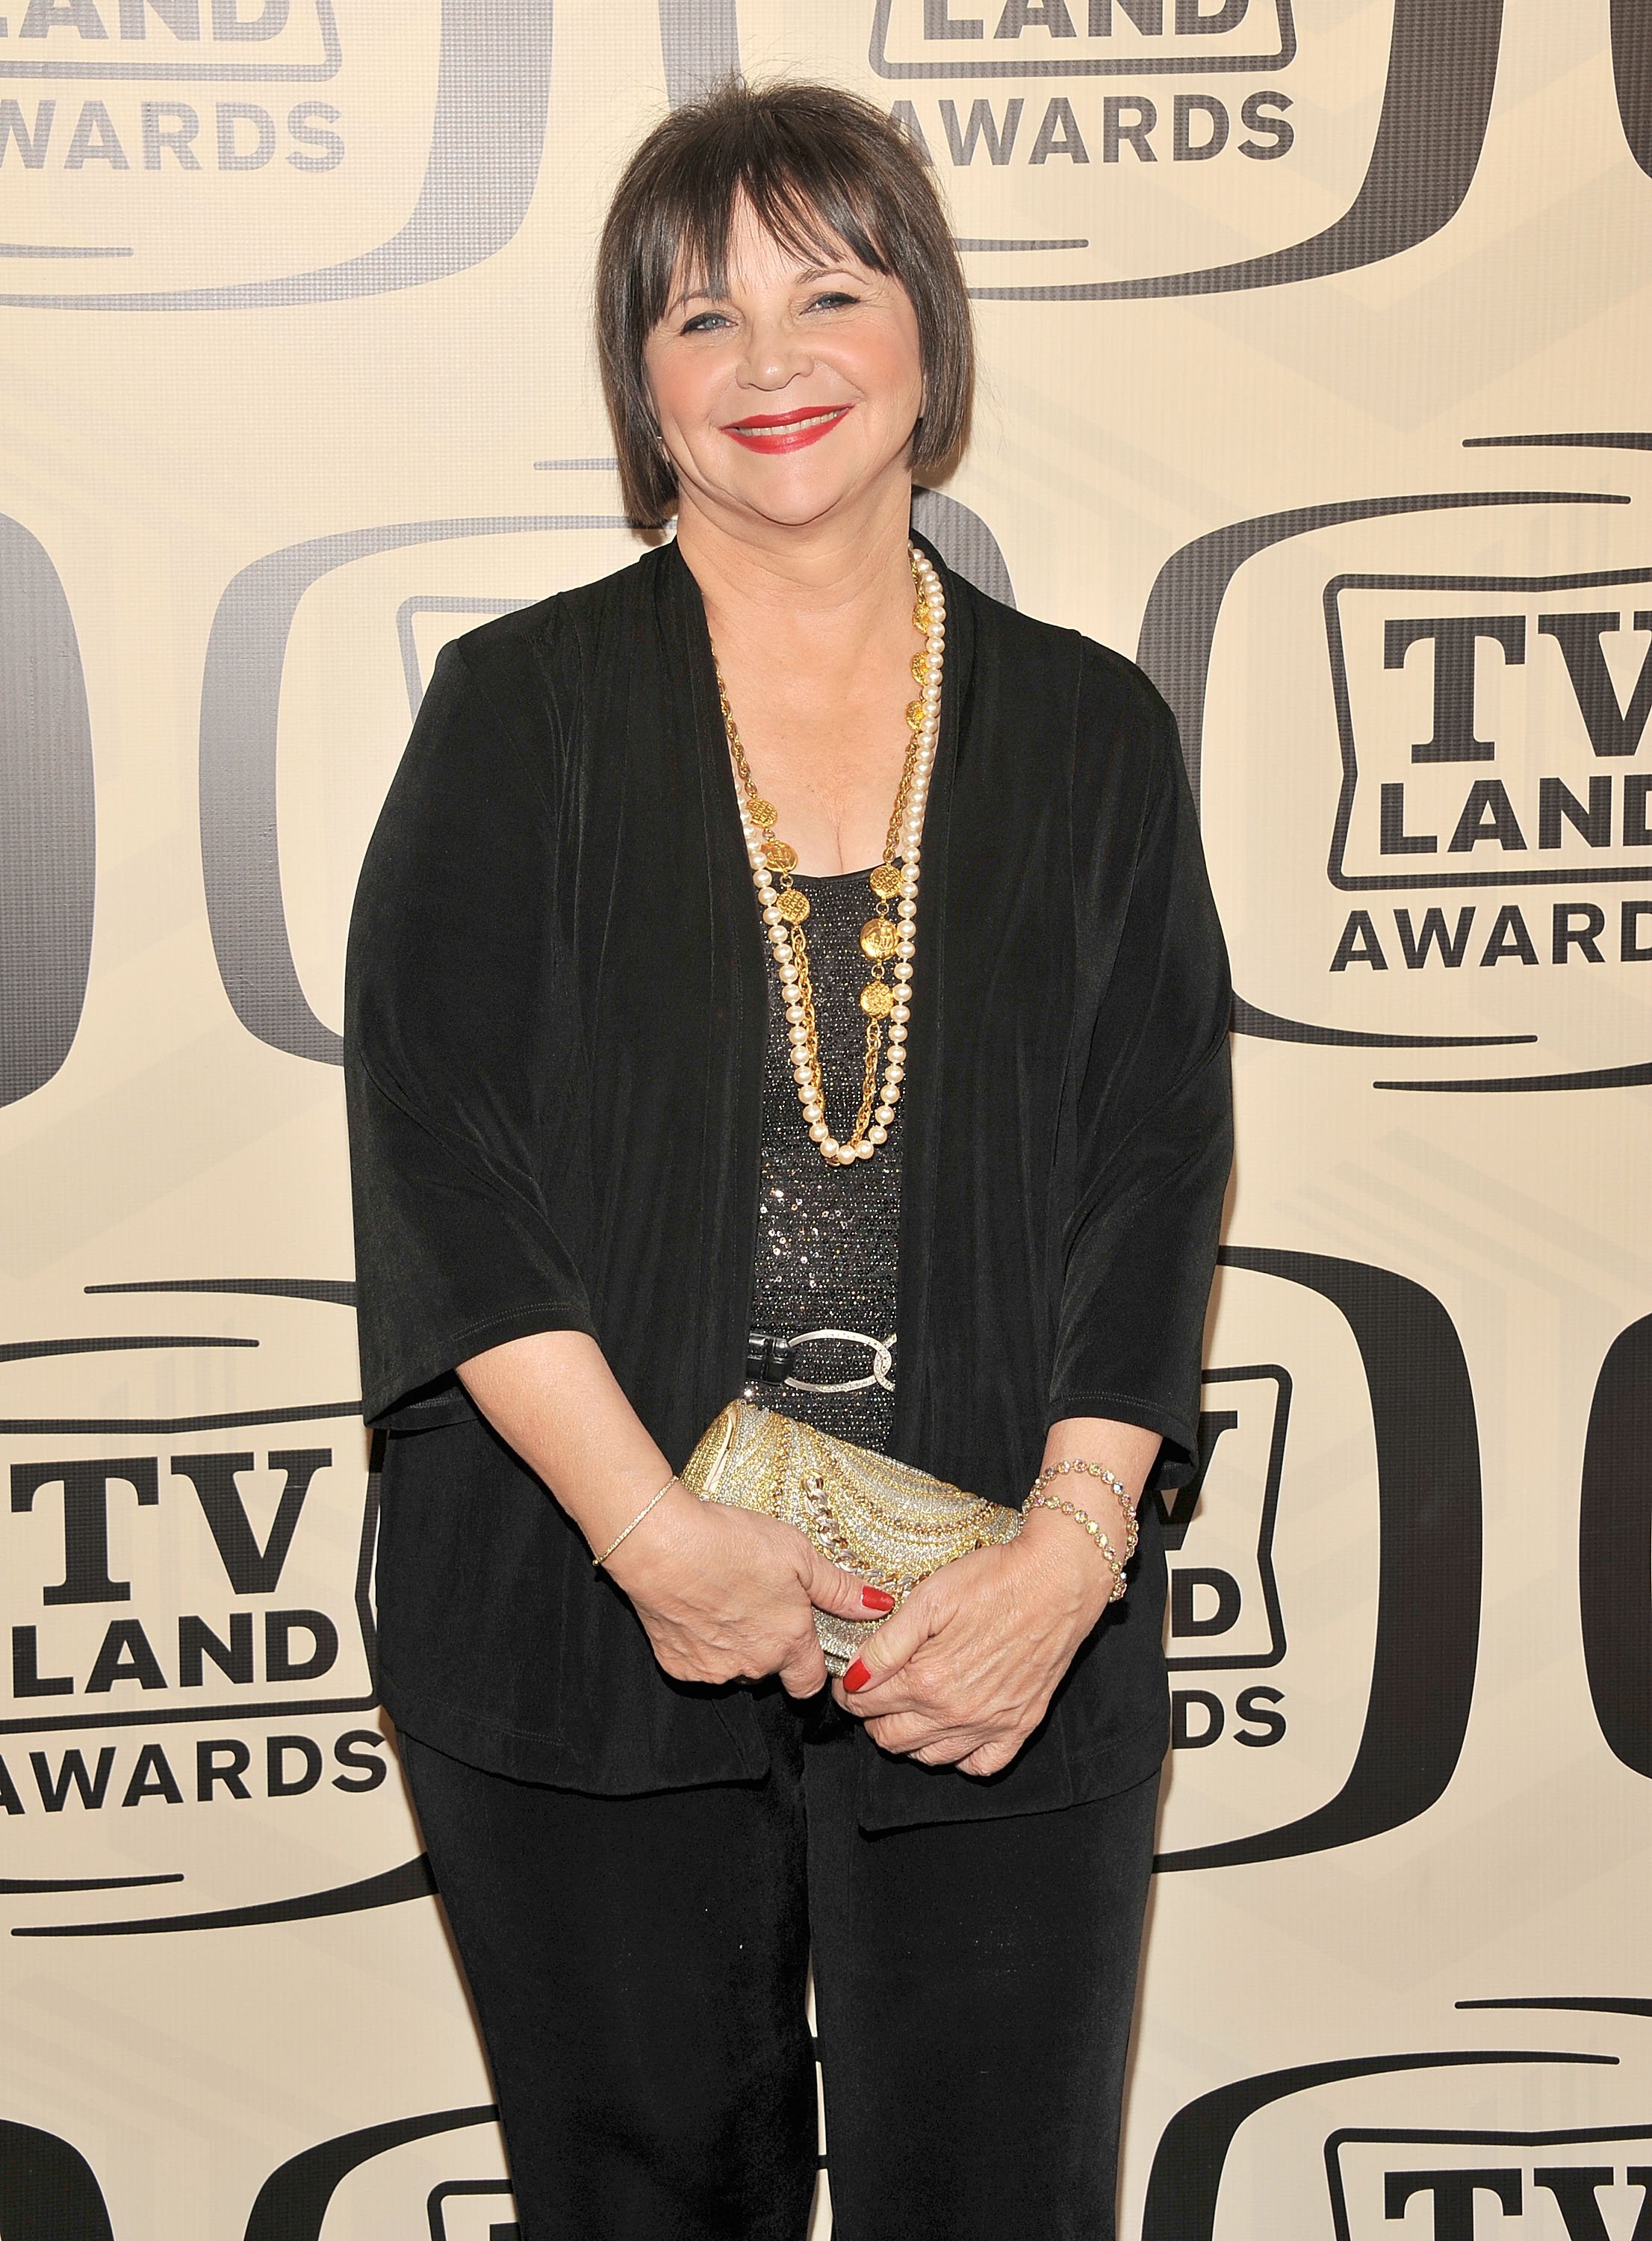 Cindy Williams attends the TV Land Awards in New York City on April 14, 2012 | Photo: Getty Images